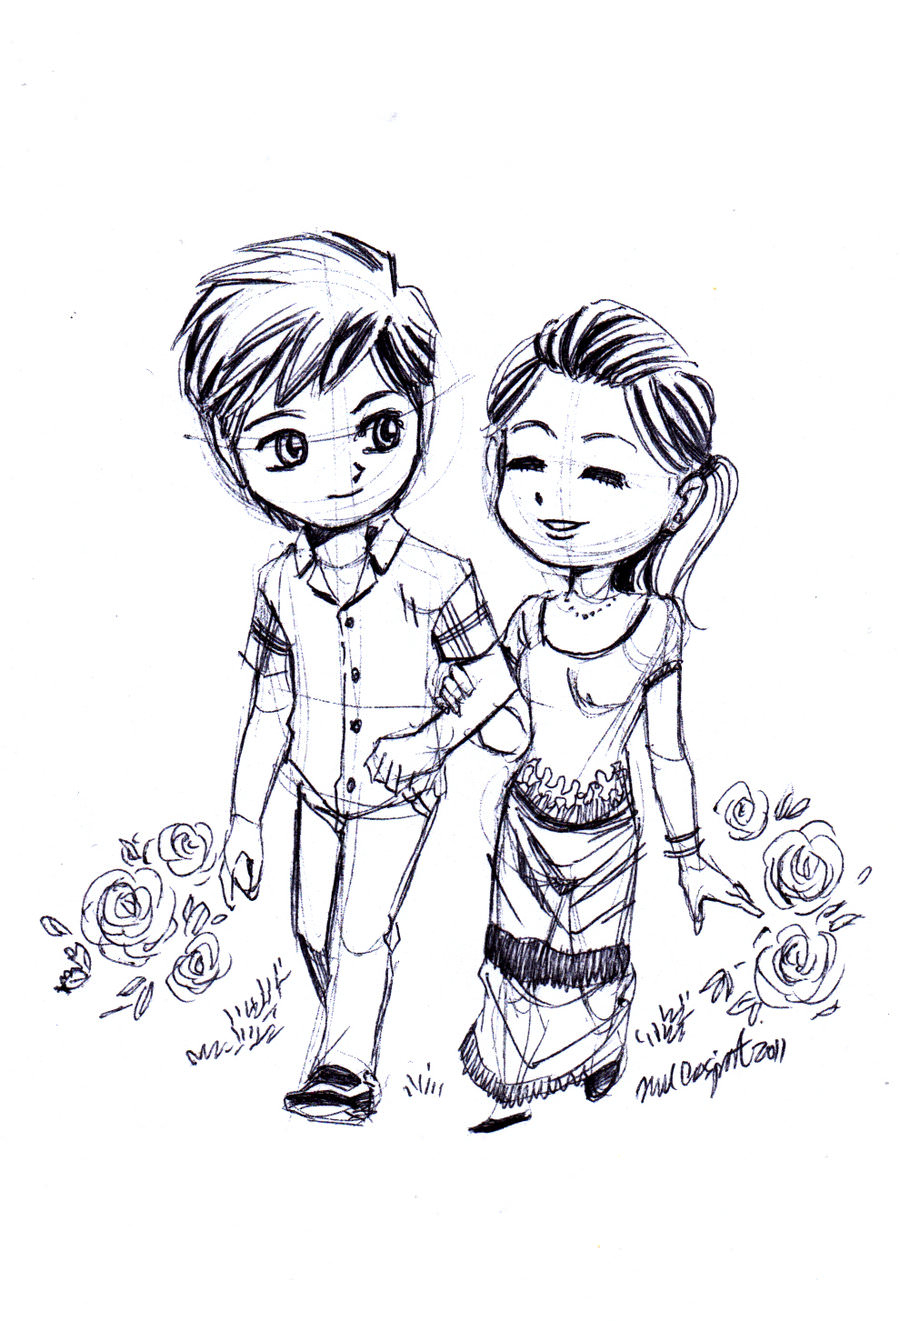 Romantic Cute Love Drawings In Pencil / See more of draw so cute on